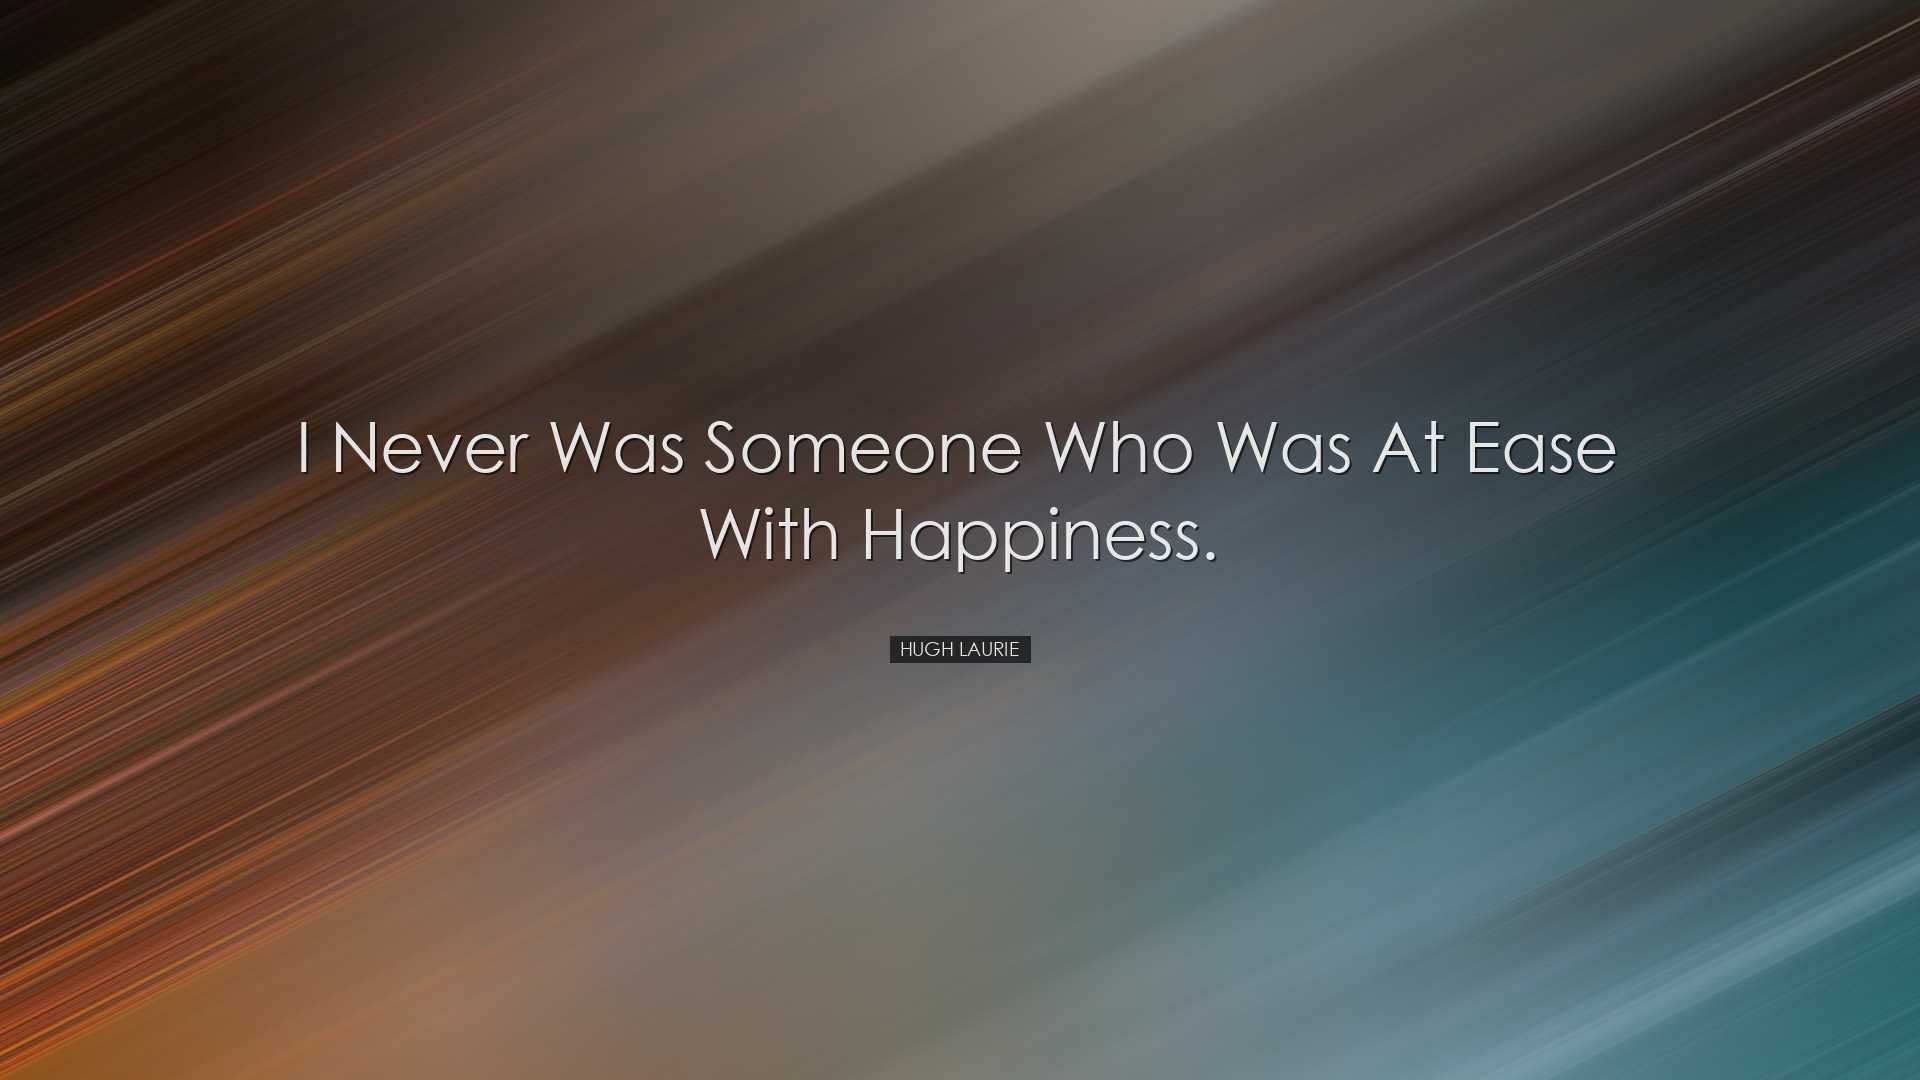 I never was someone who was at ease with happiness. - Hugh Laurie